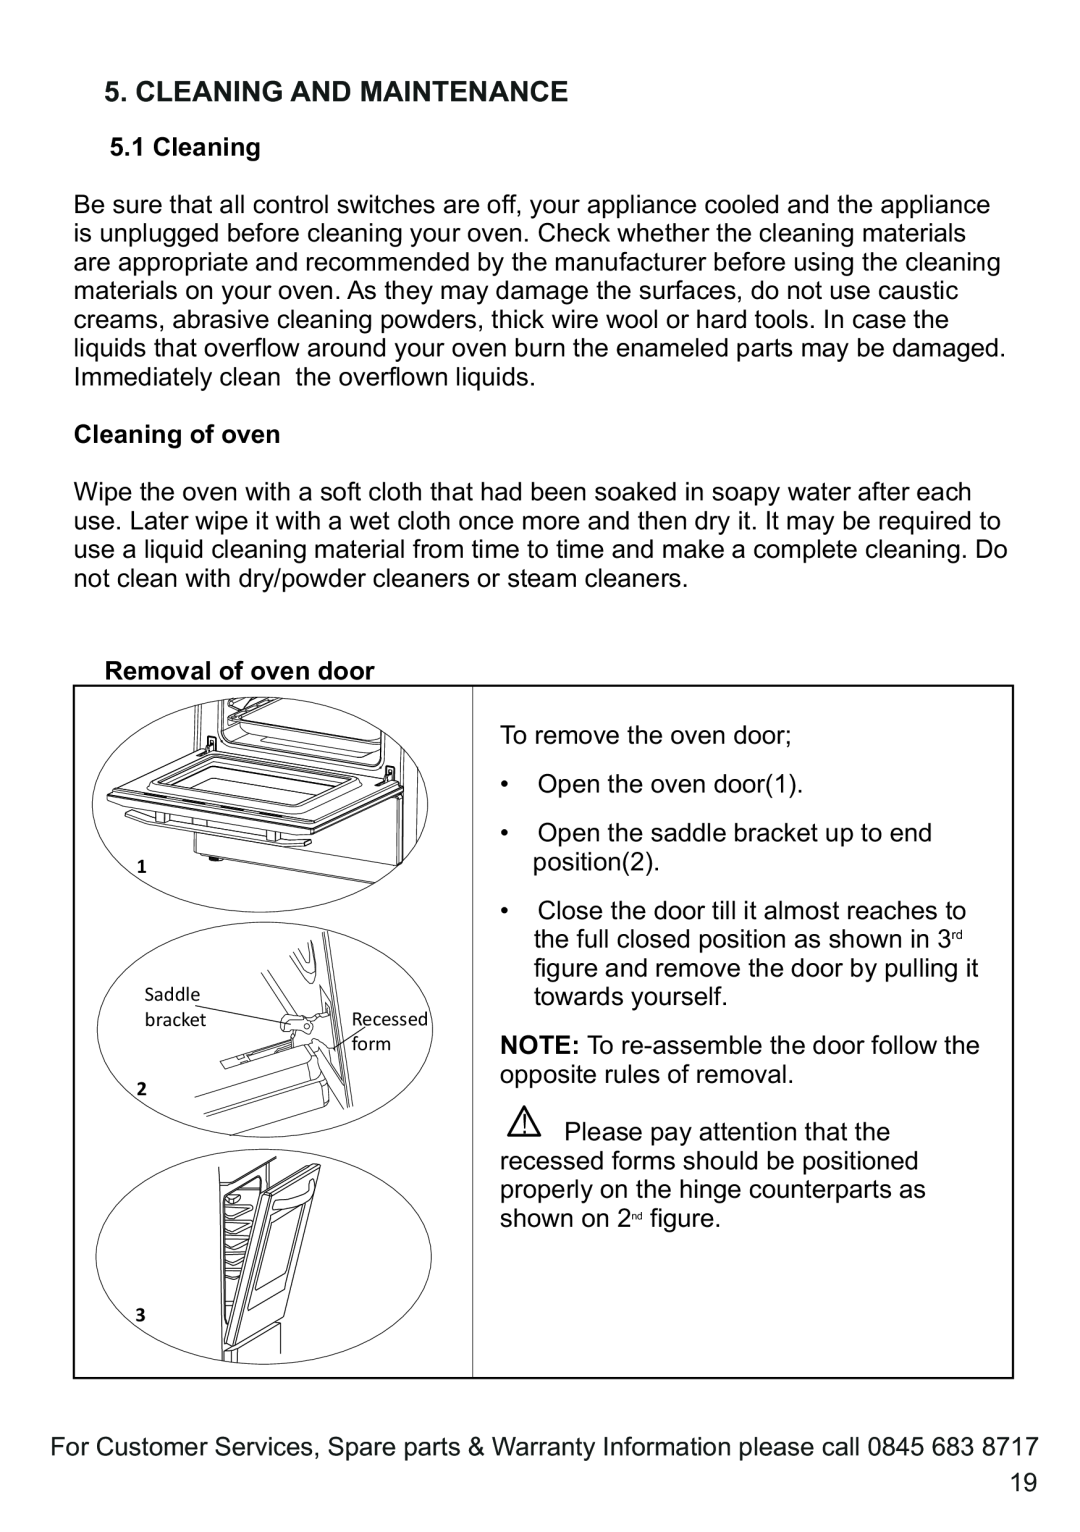 Russell Hobbs RHGC1 instruction manual Cleaning And Maintenance, 5.1Cleaning, Cleaning of oven, Removal of oven door 